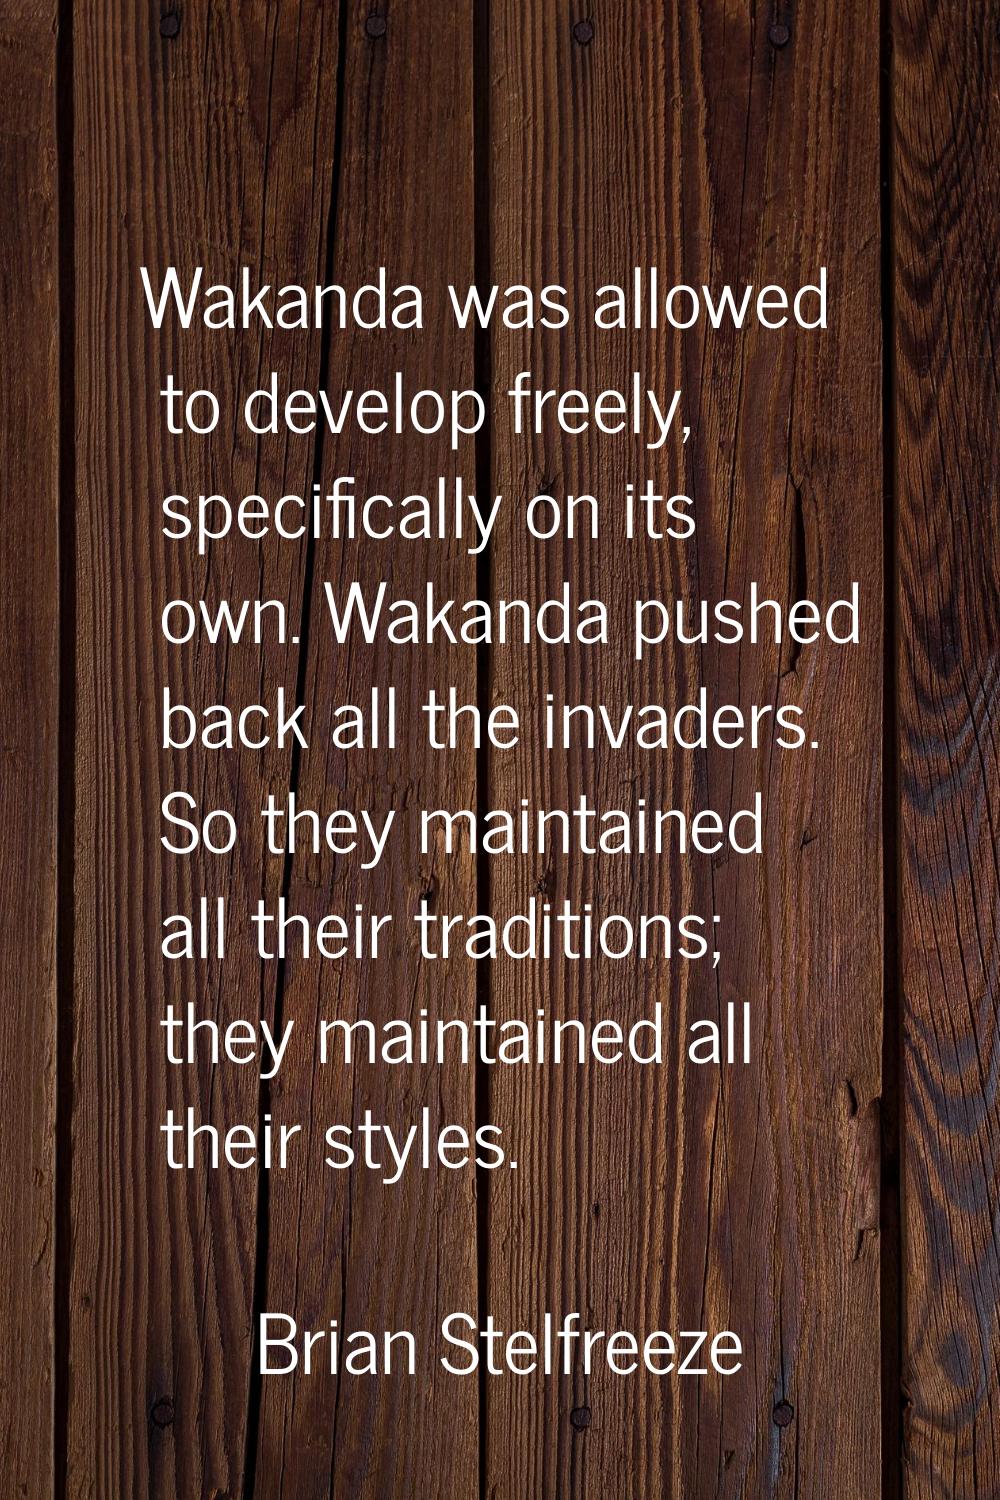 Wakanda was allowed to develop freely, specifically on its own. Wakanda pushed back all the invader